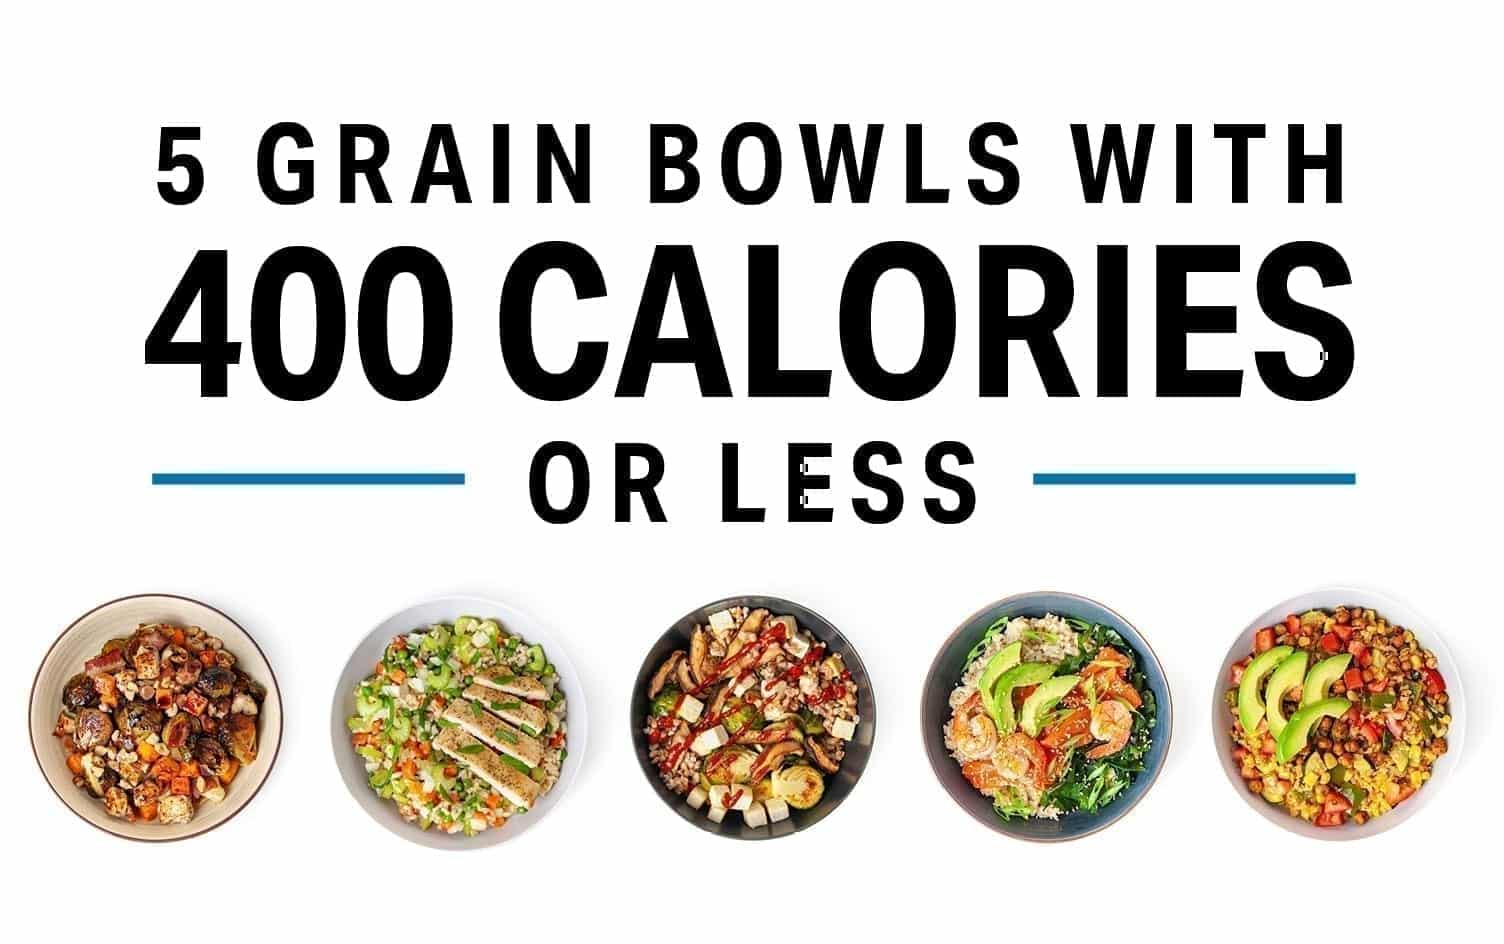 5 Grain Bowls With 400 Calories or Less